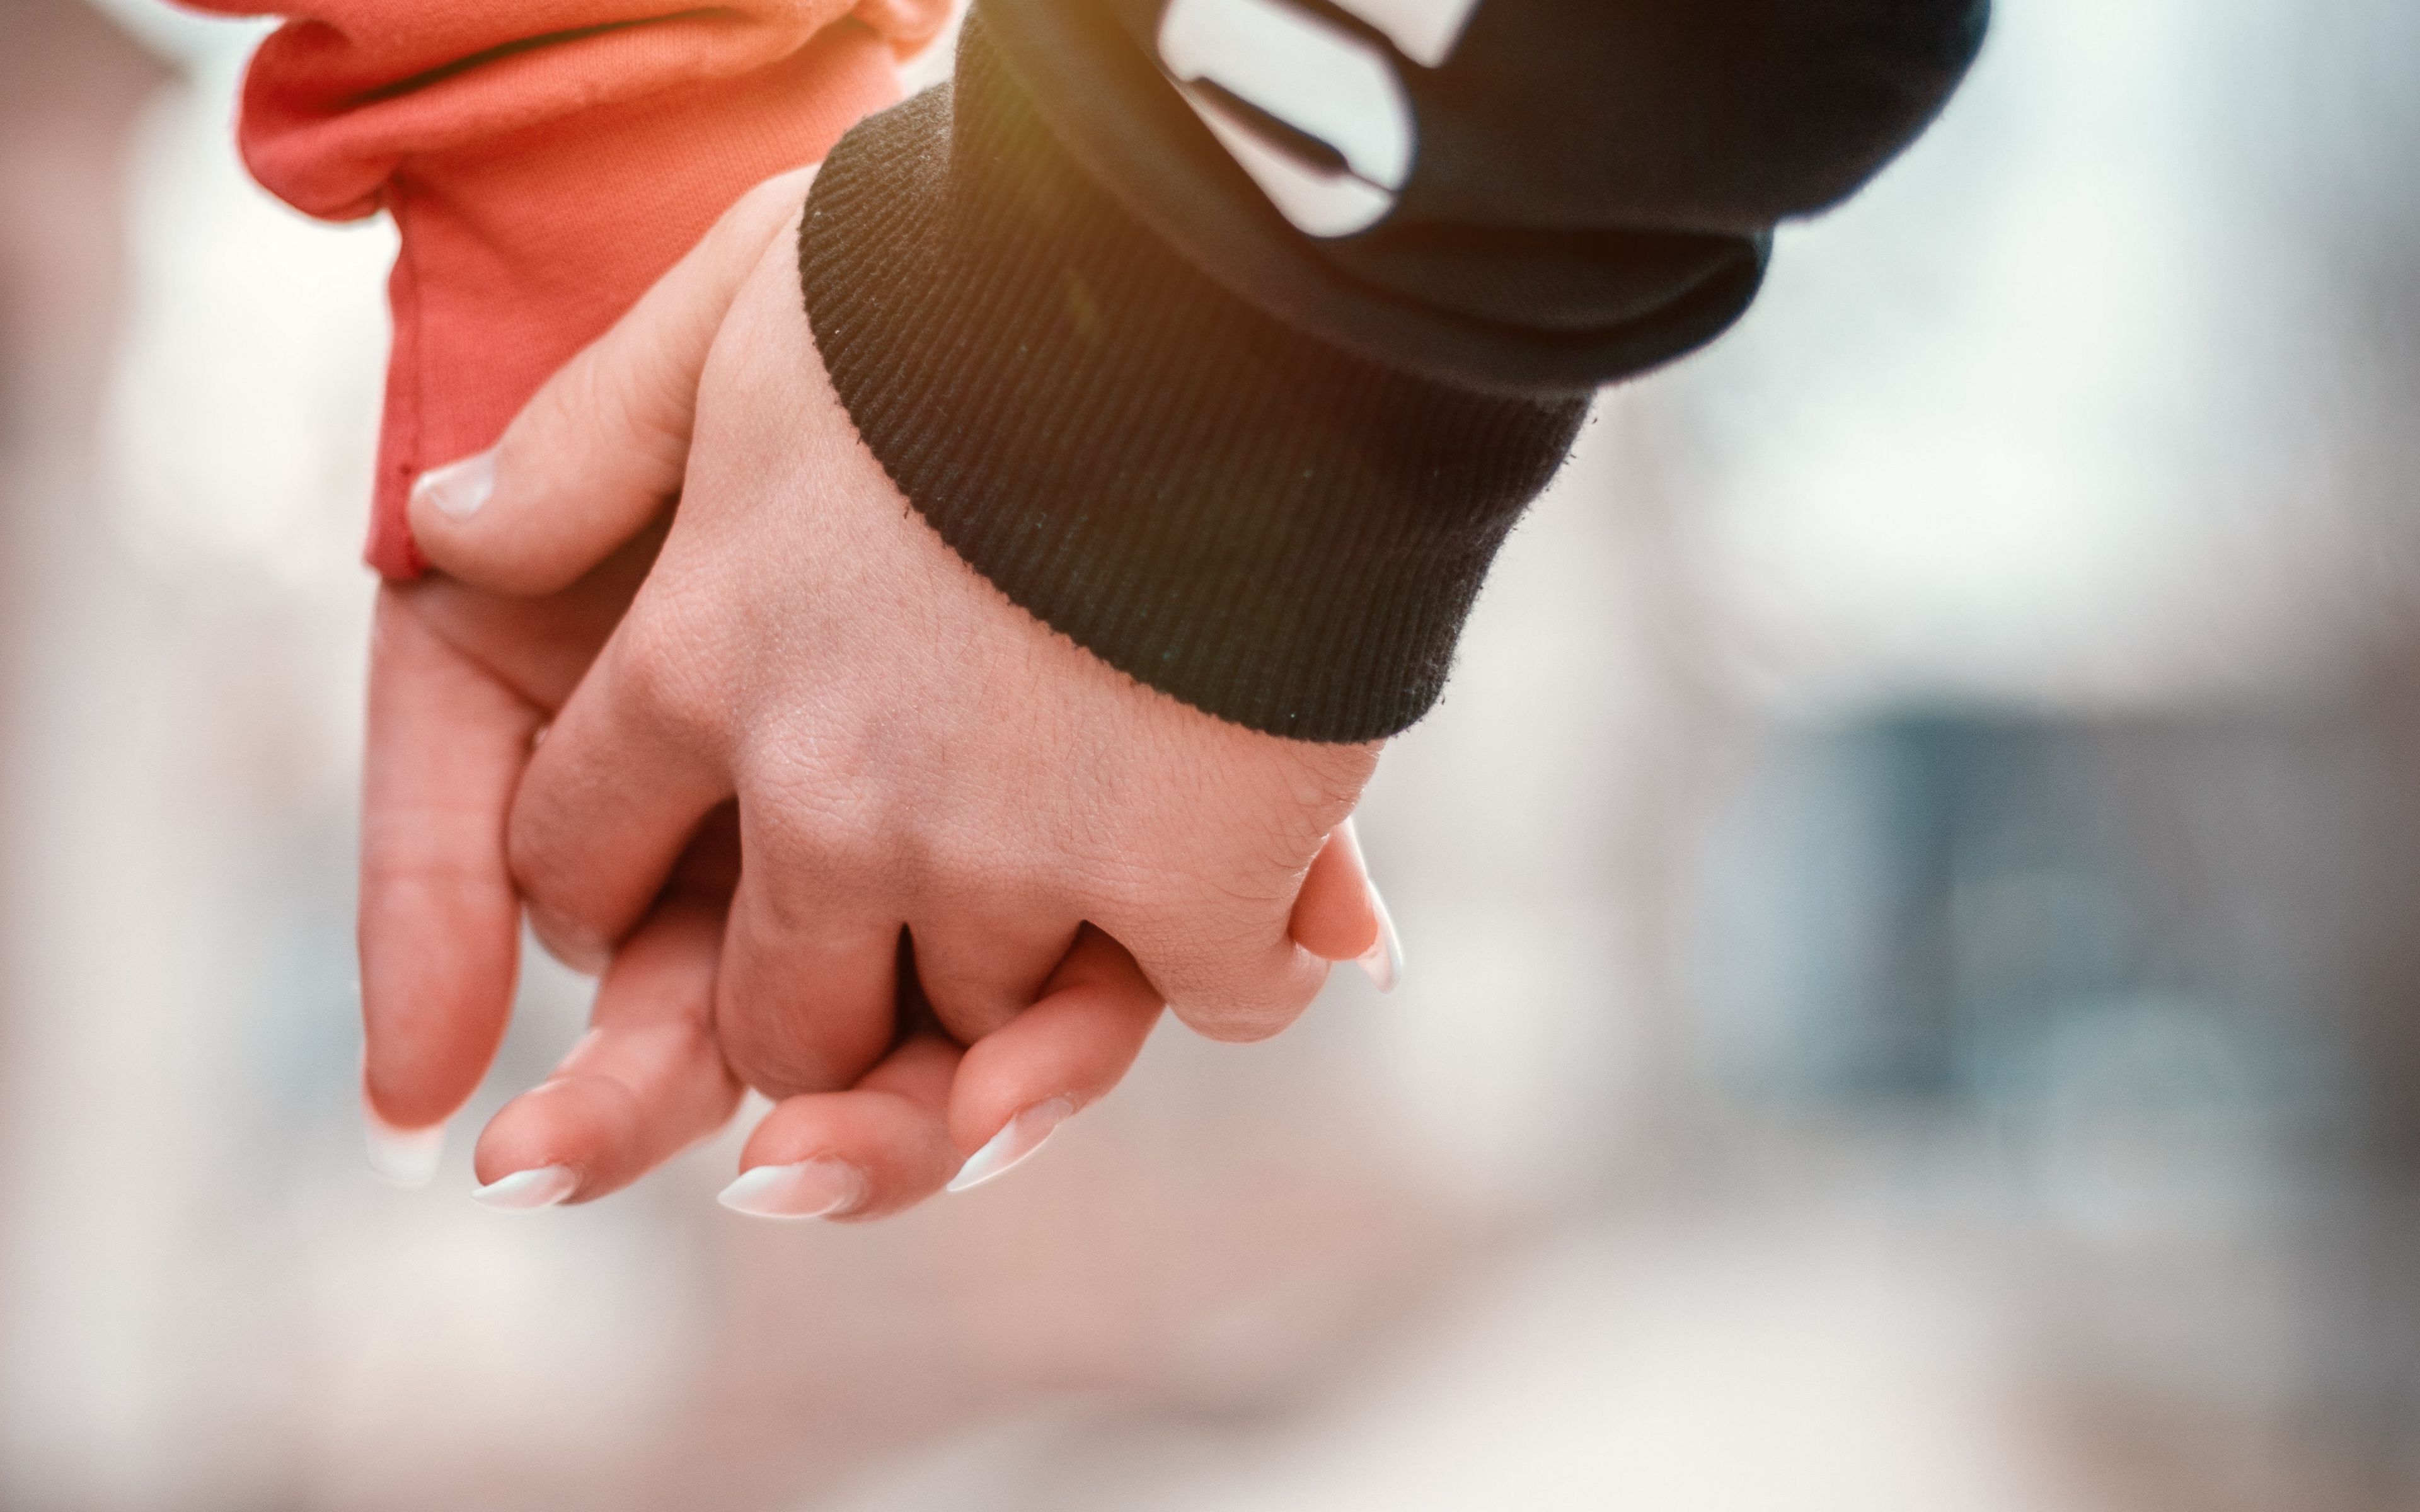 Download wallpaper 3840x2400 couple, hands, touch, tenderness, romance,  love 4k ultra hd 16:10 hd background